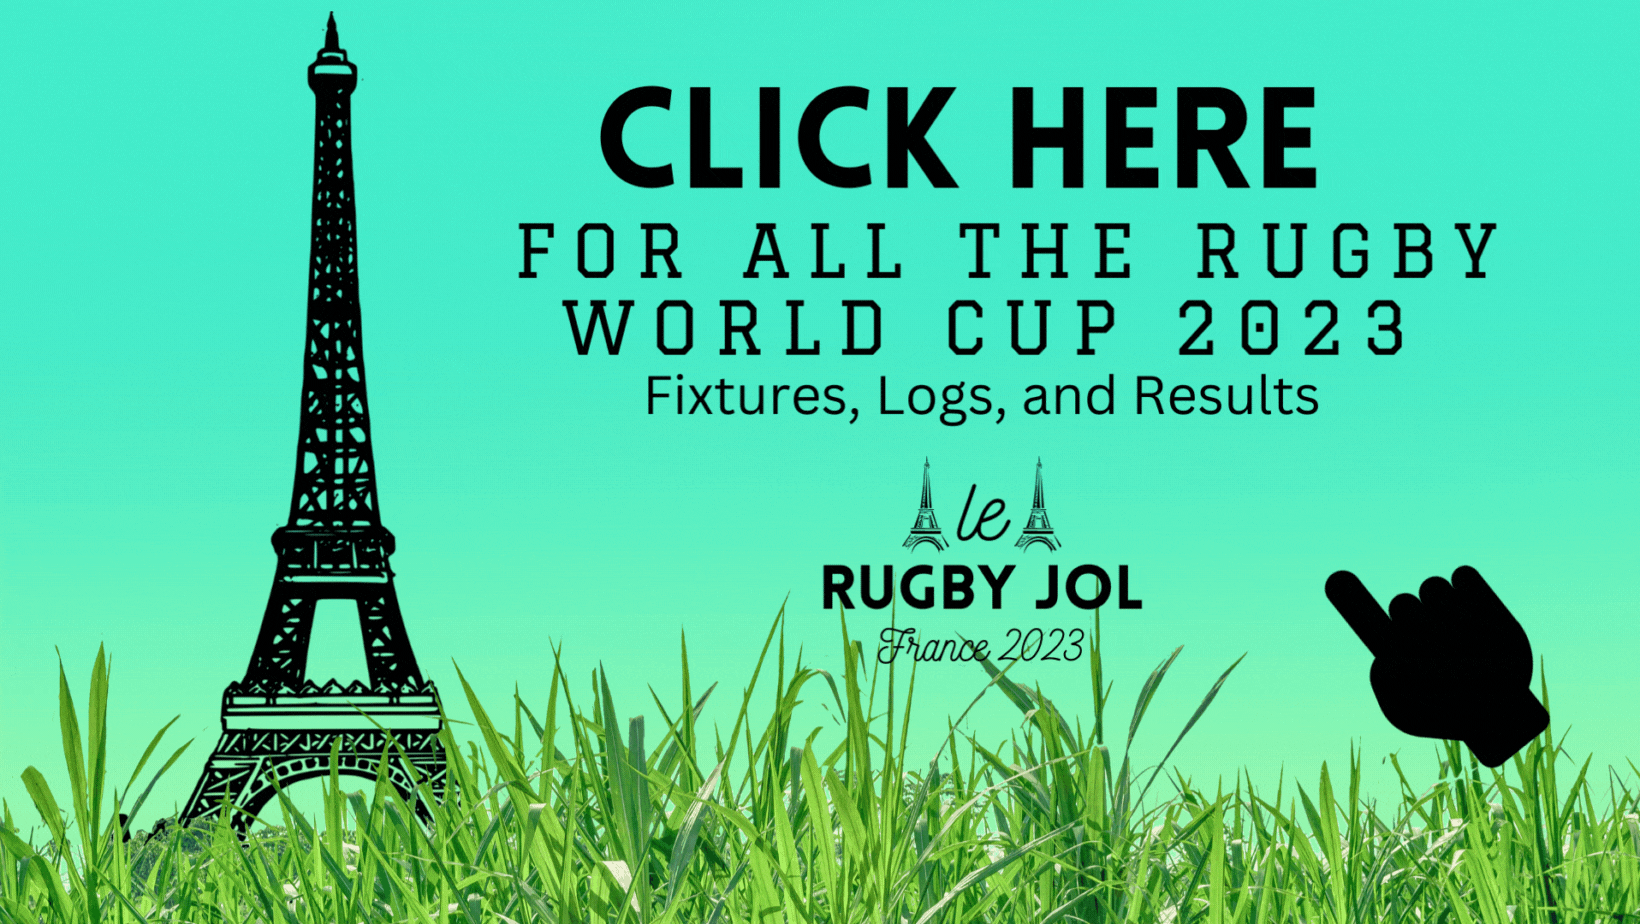 Le rugby jol 2023